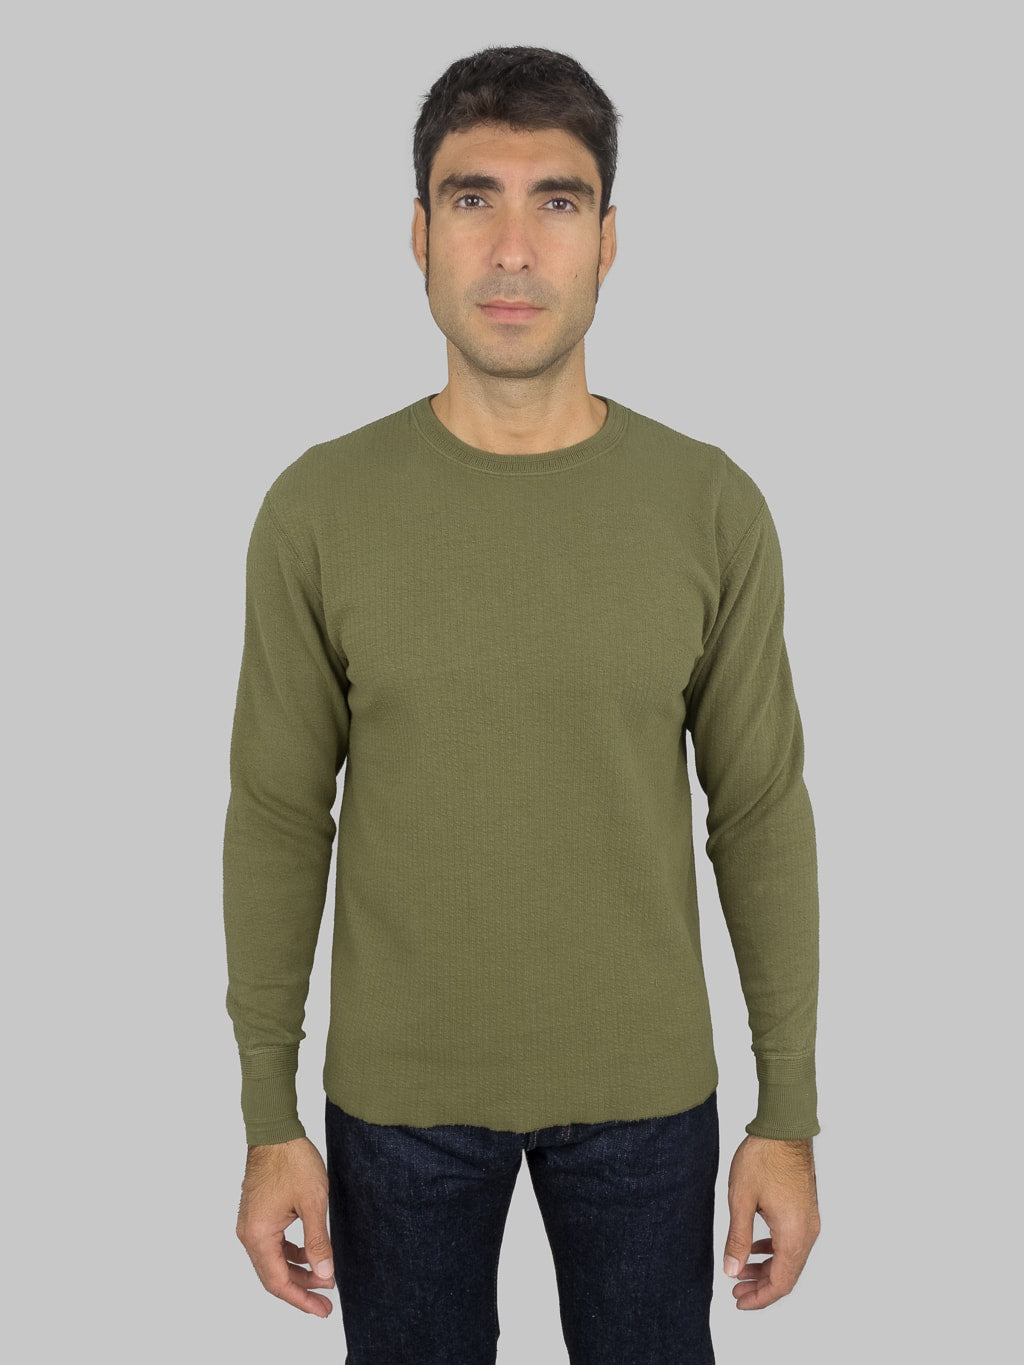 Loop Weft Double Face Jacquard crewneck Thermal army olive slim fit